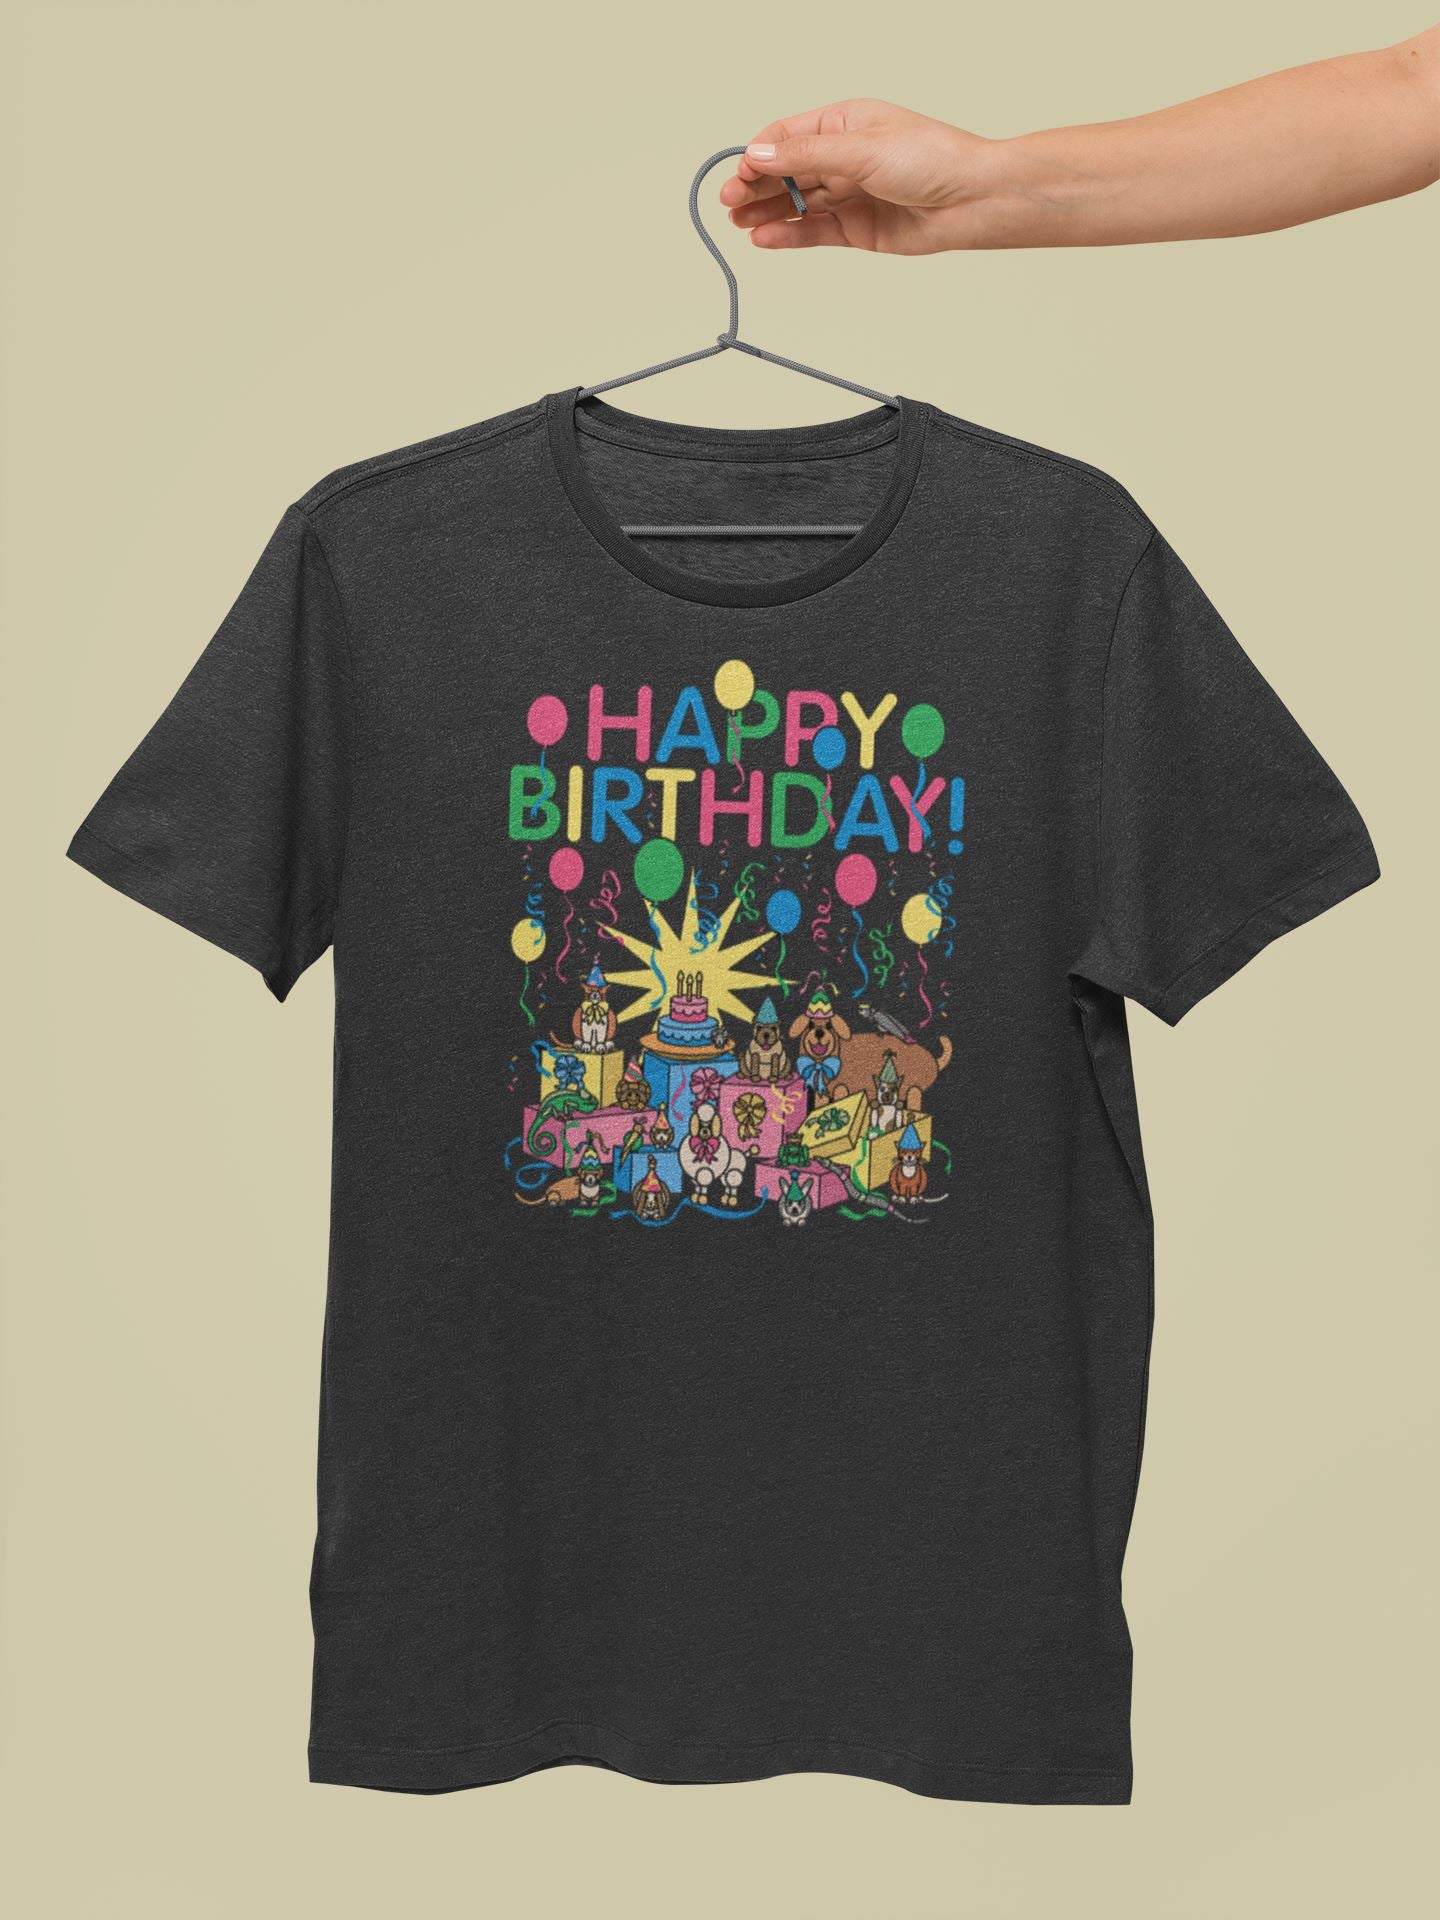 Happy Birthday Special Birthday T Shirt for Parents for Children's Birthday freeshipping - Catch My Drift India